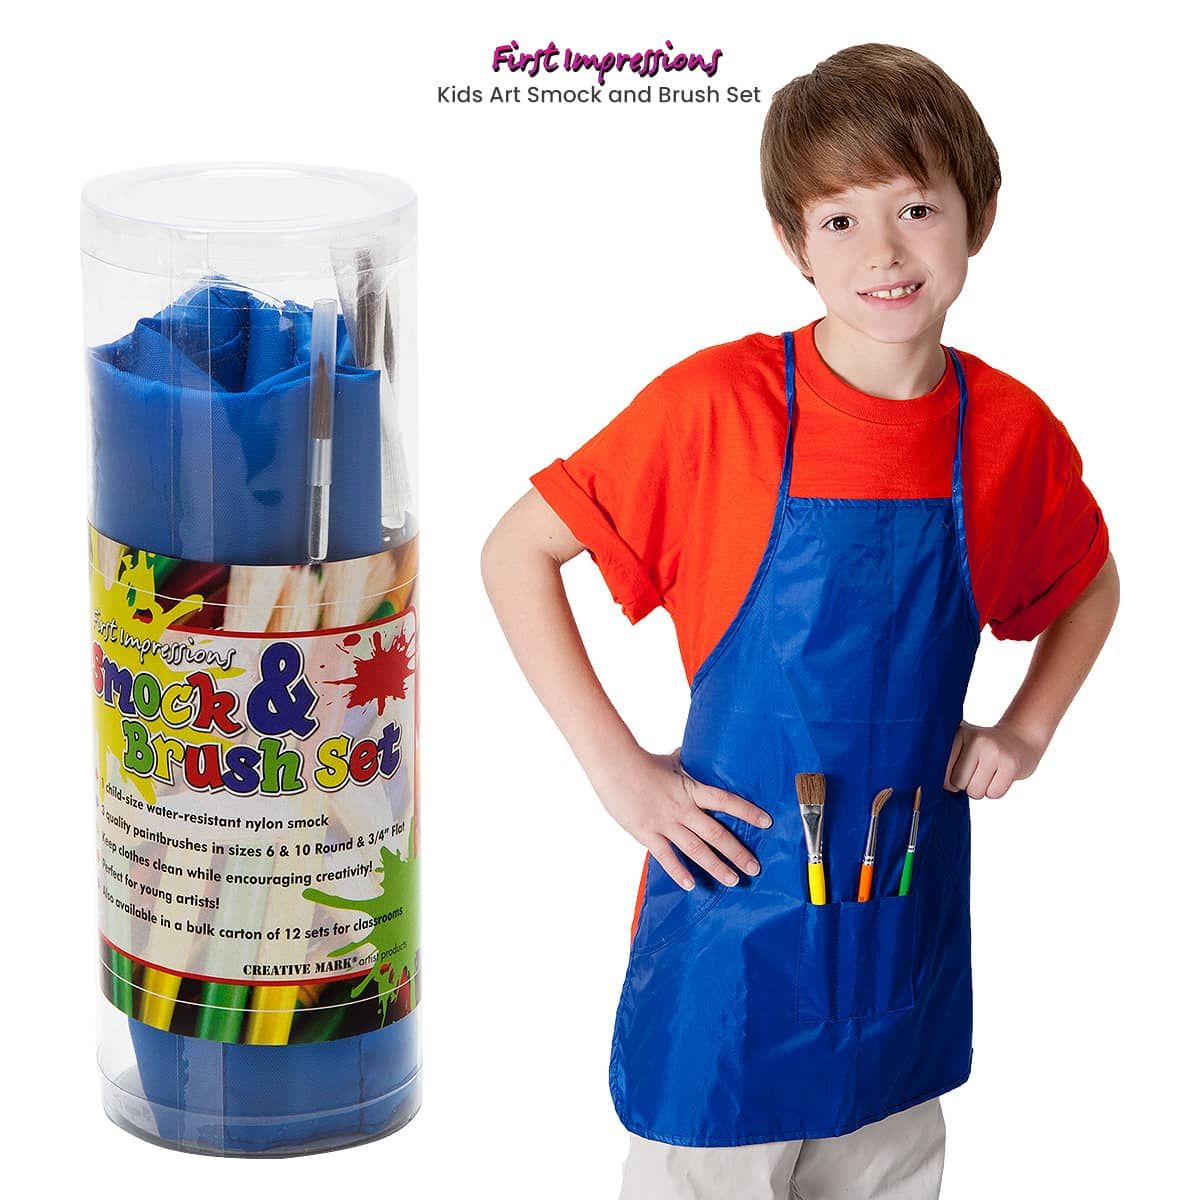 Keep your little art painter clean without hindering their imagination with the First Impressions Smock and Brush Set!